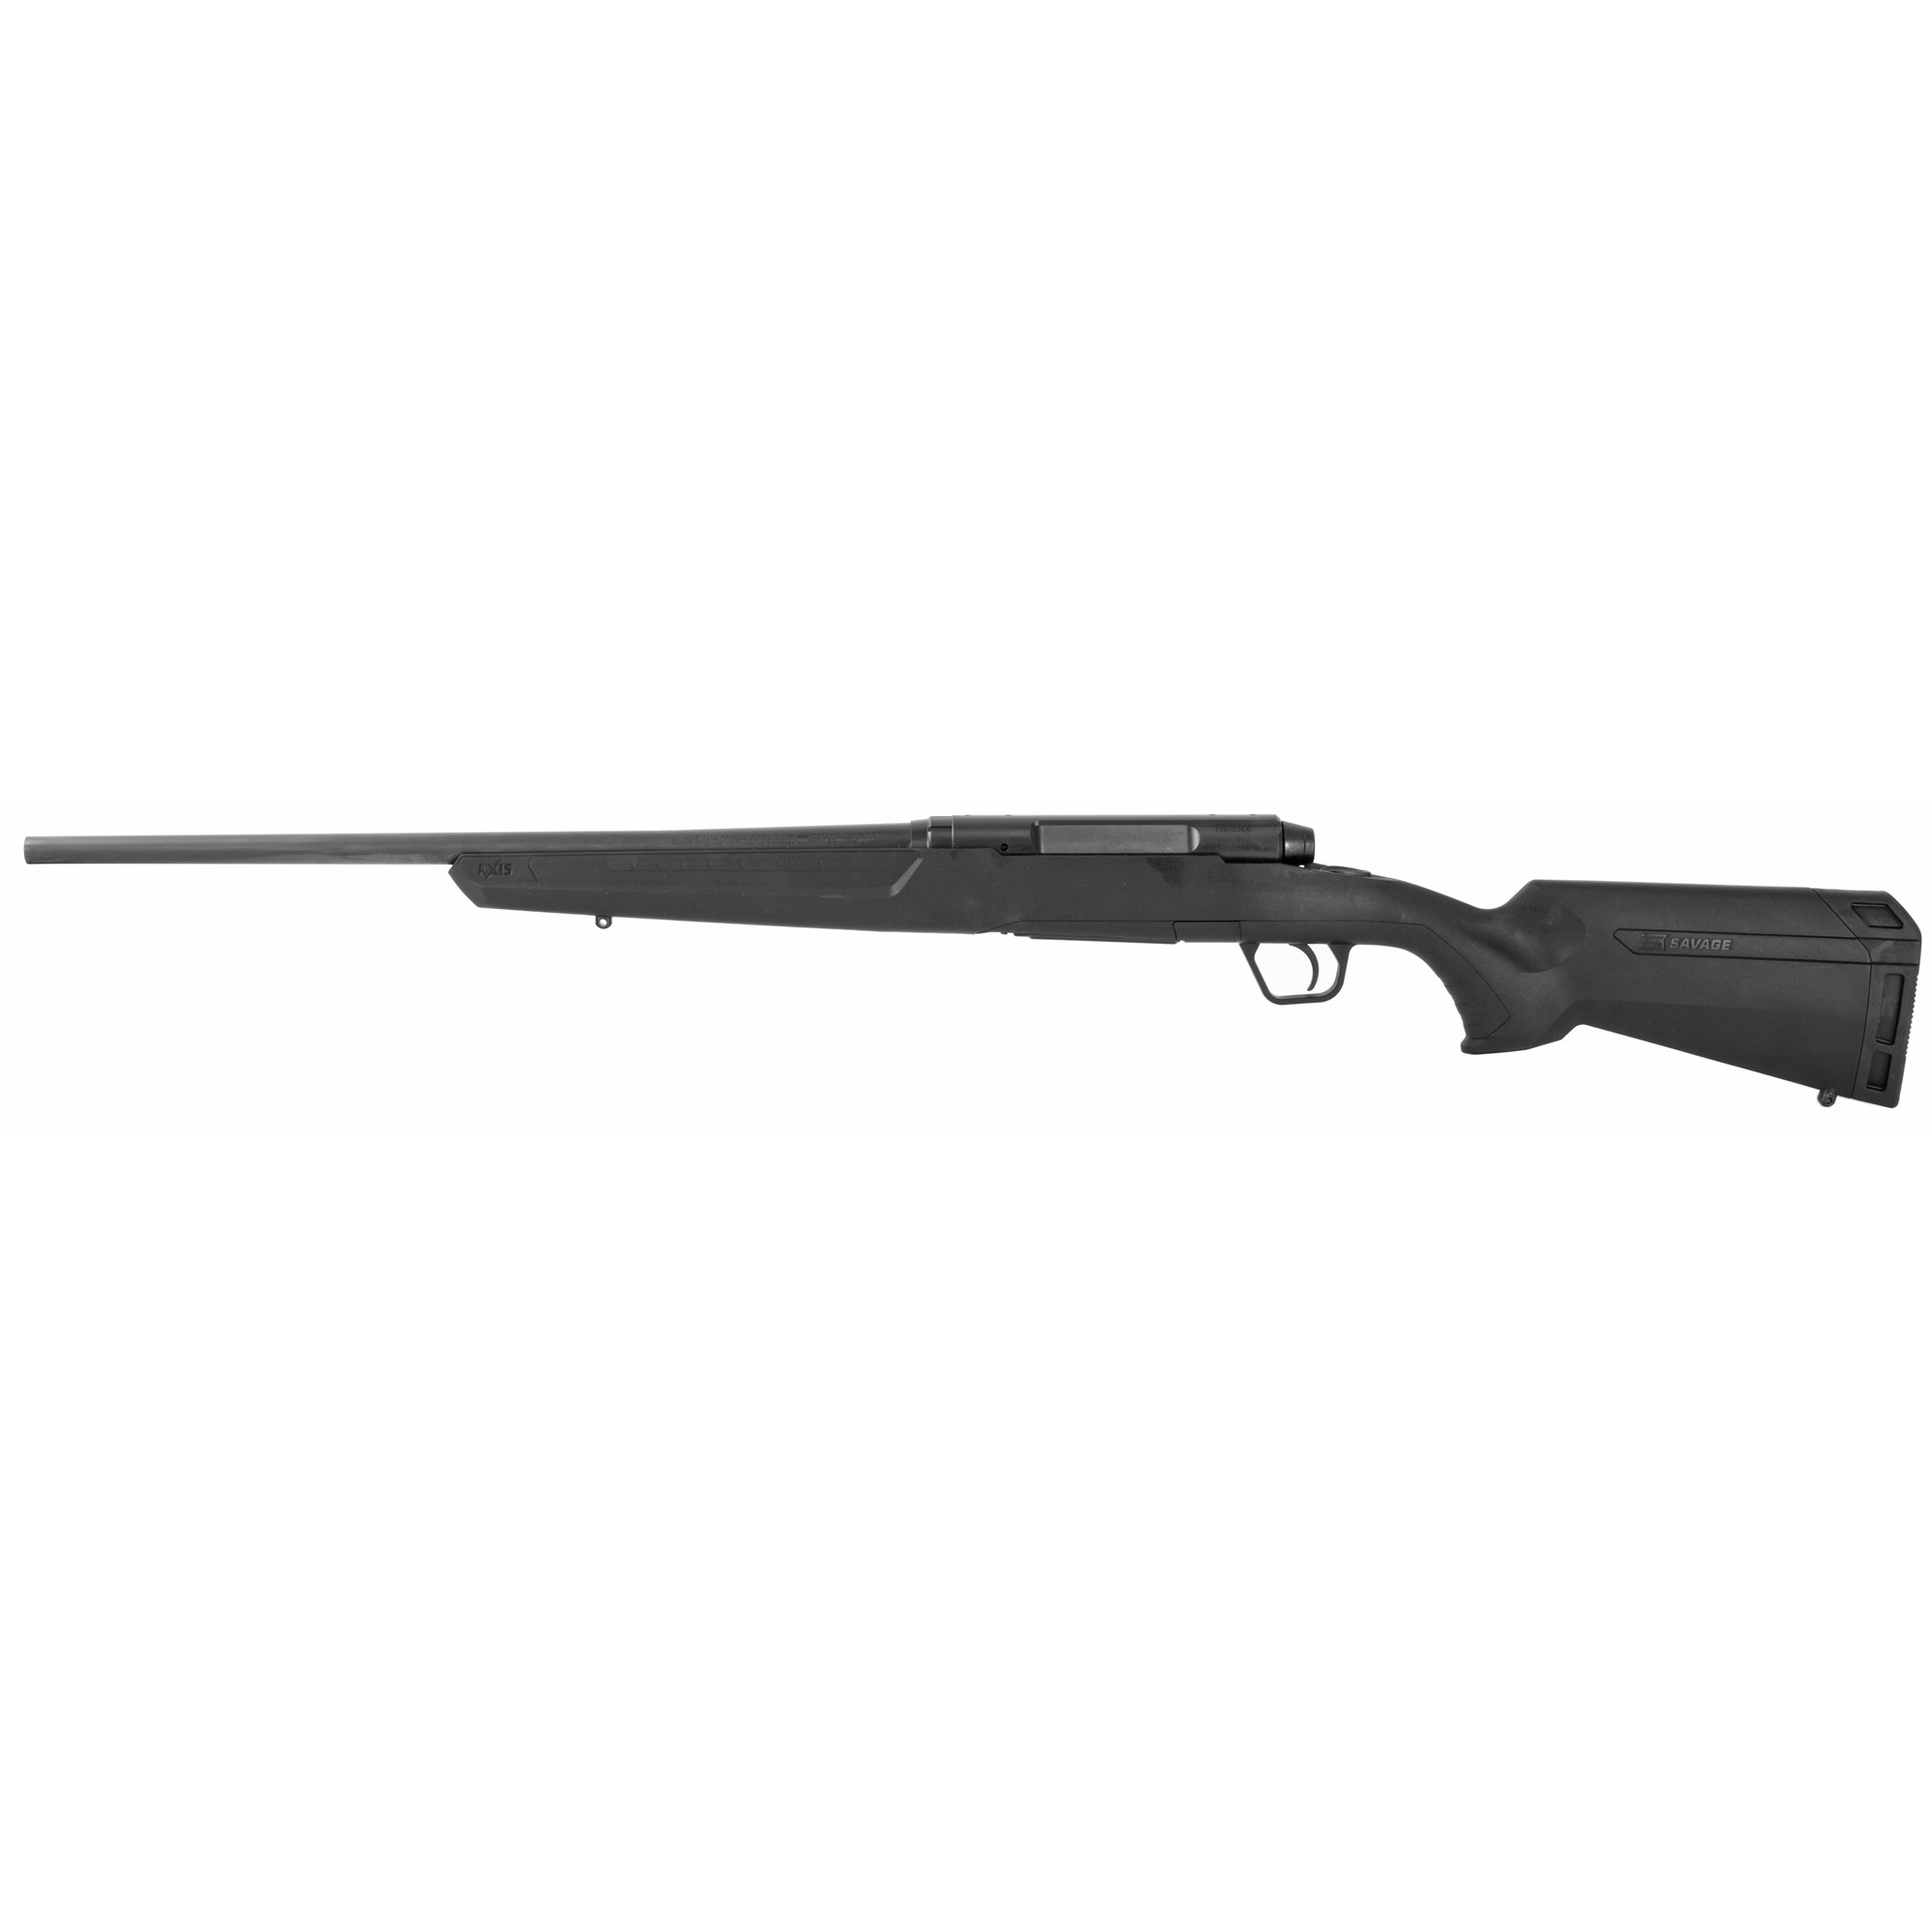 SAVAGE ARMS AXIS II CMPCT 350LEG 18 4RD BLK